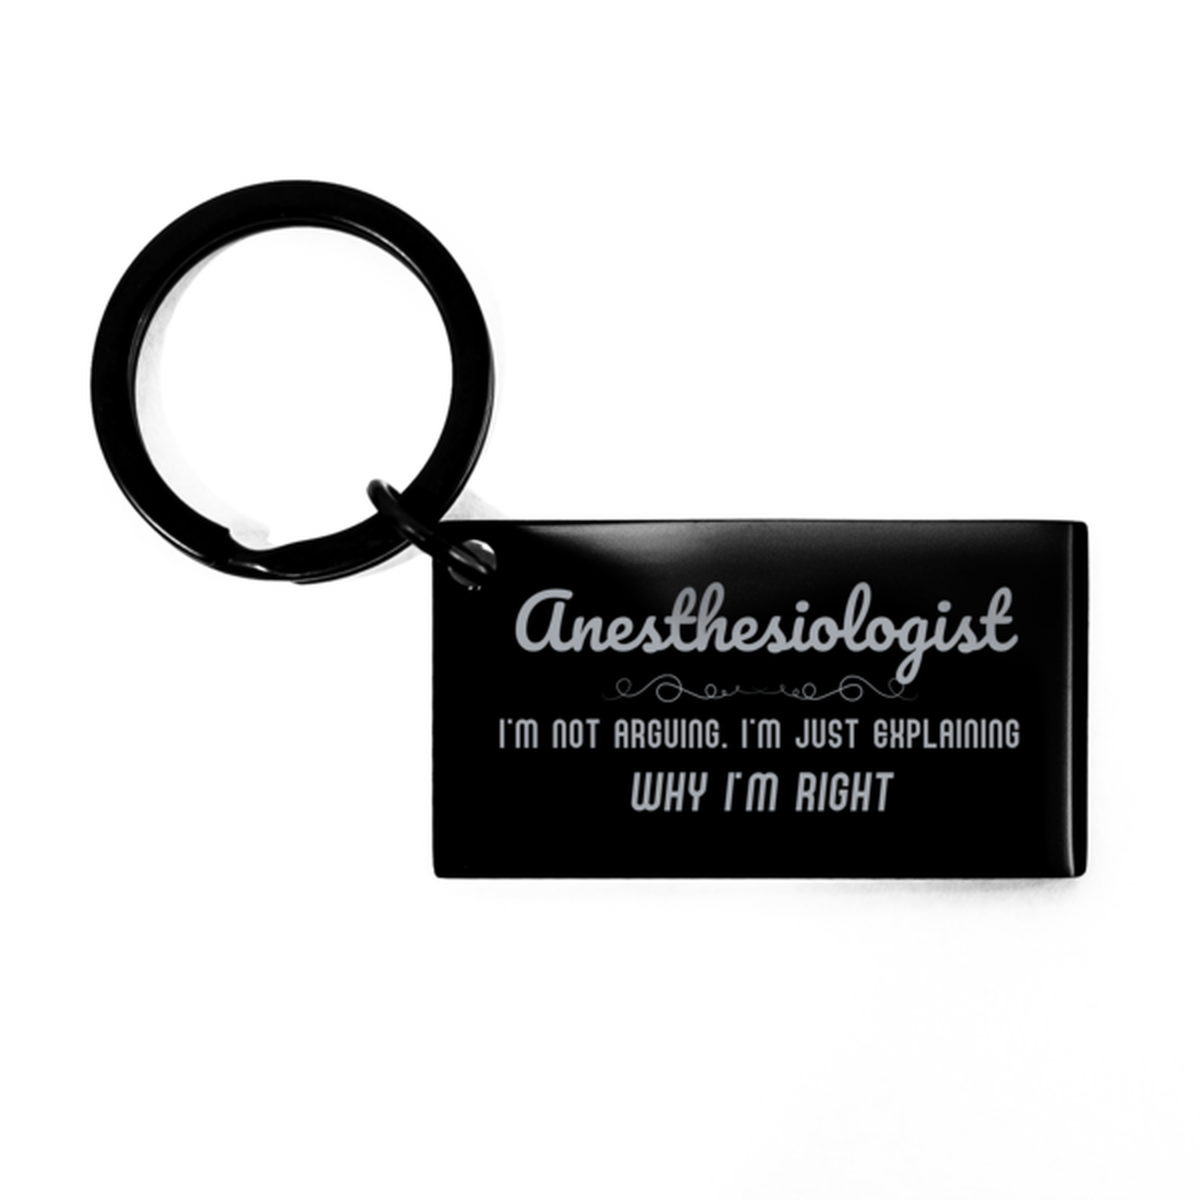 Anesthesiologist I'm not Arguing. I'm Just Explaining Why I'm RIGHT Keychain, Funny Saying Quote Anesthesiologist Gifts For Anesthesiologist Graduation Birthday Christmas Gifts for Men Women Coworker